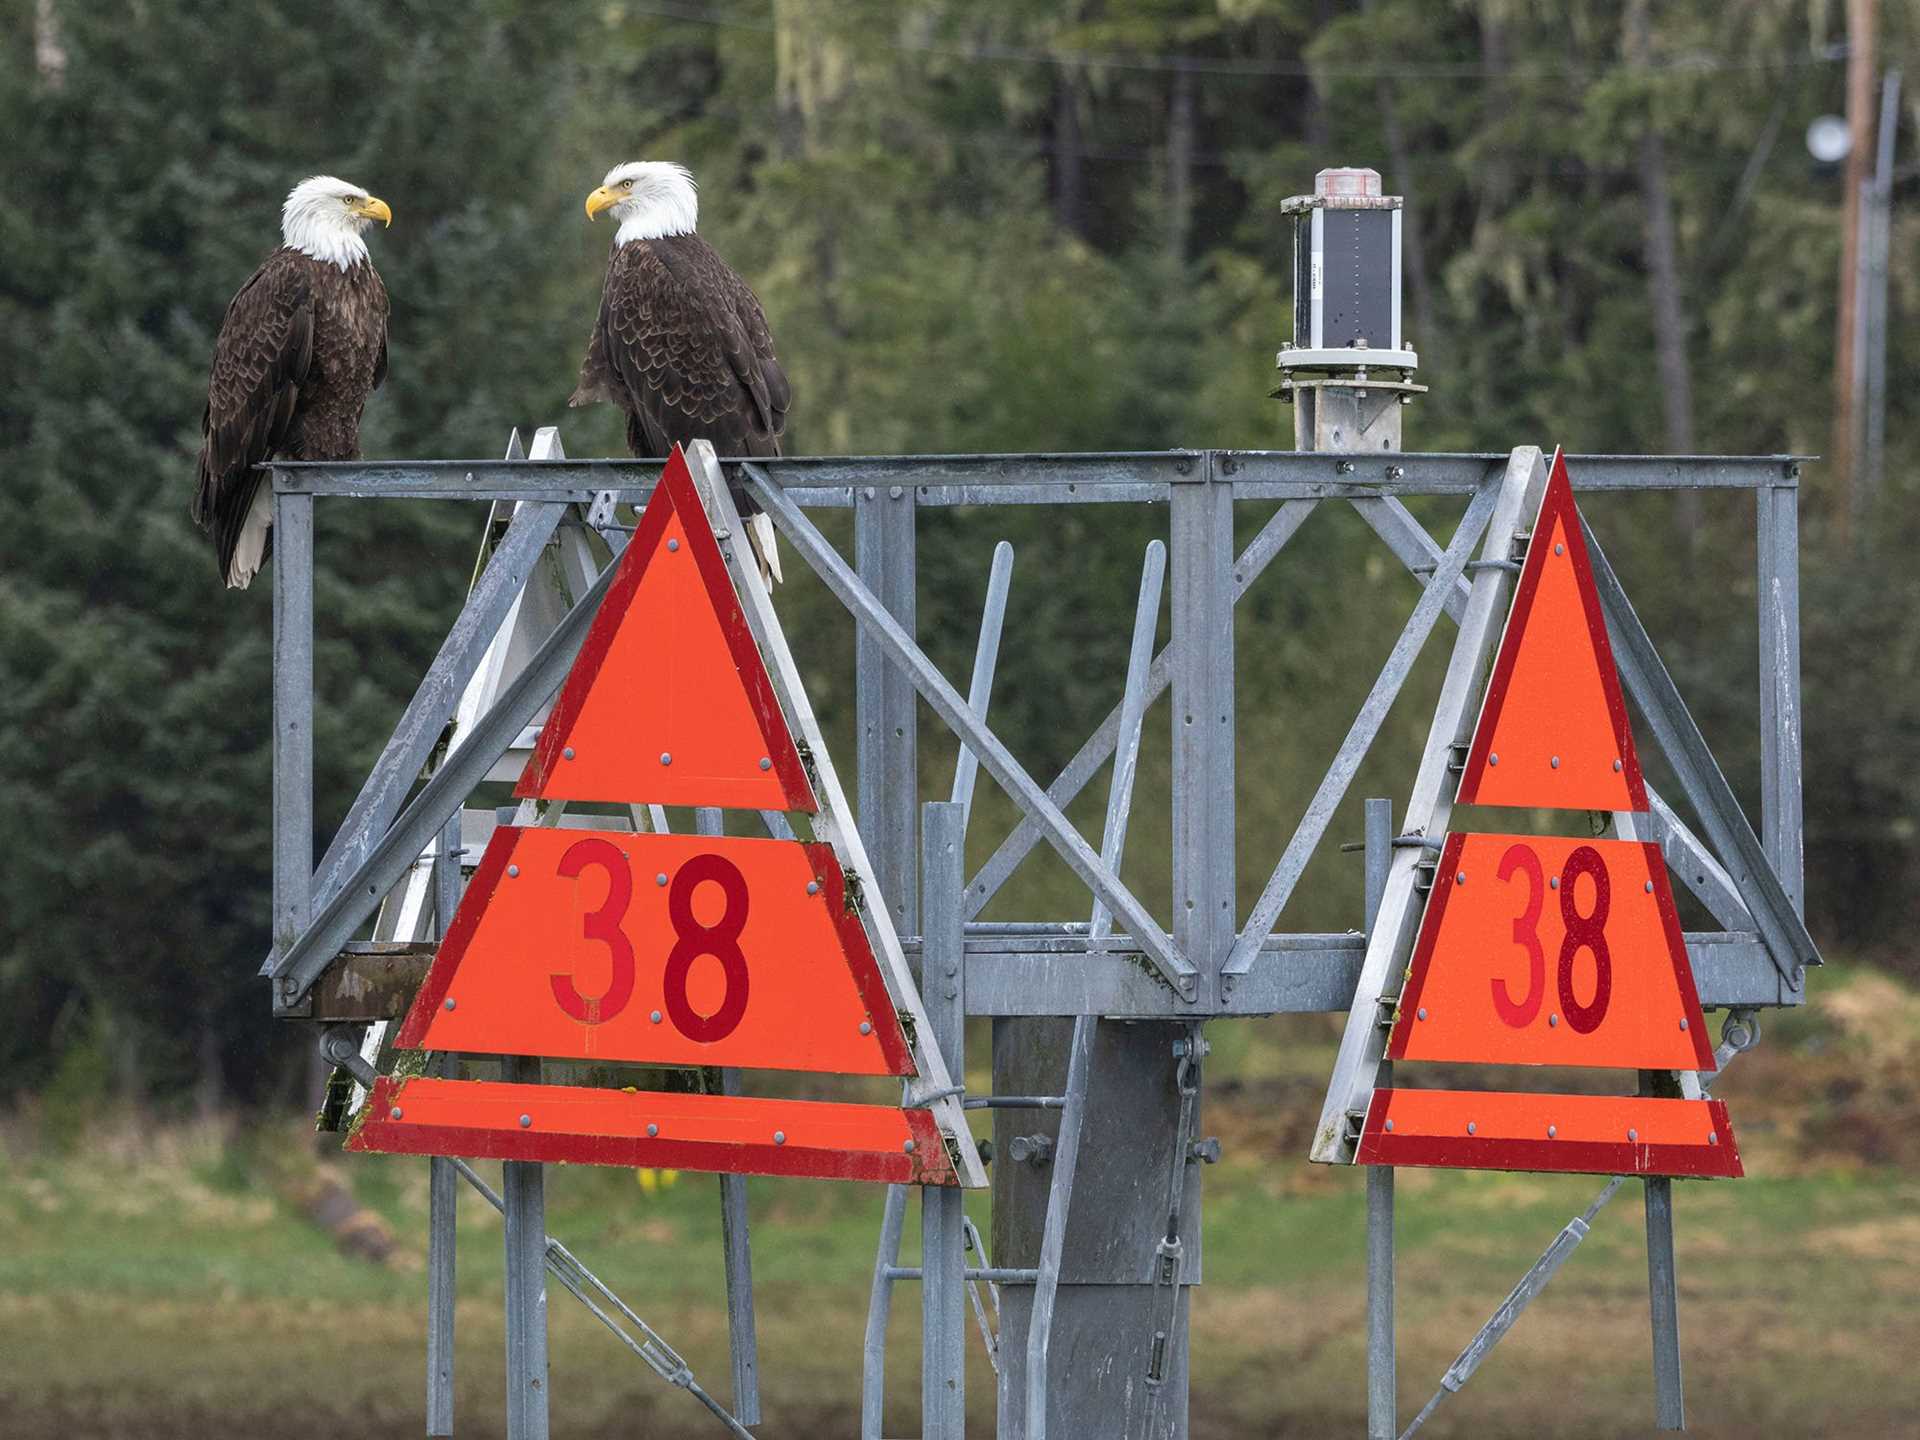 two bald eagles perched on top of bright orange triangular markers